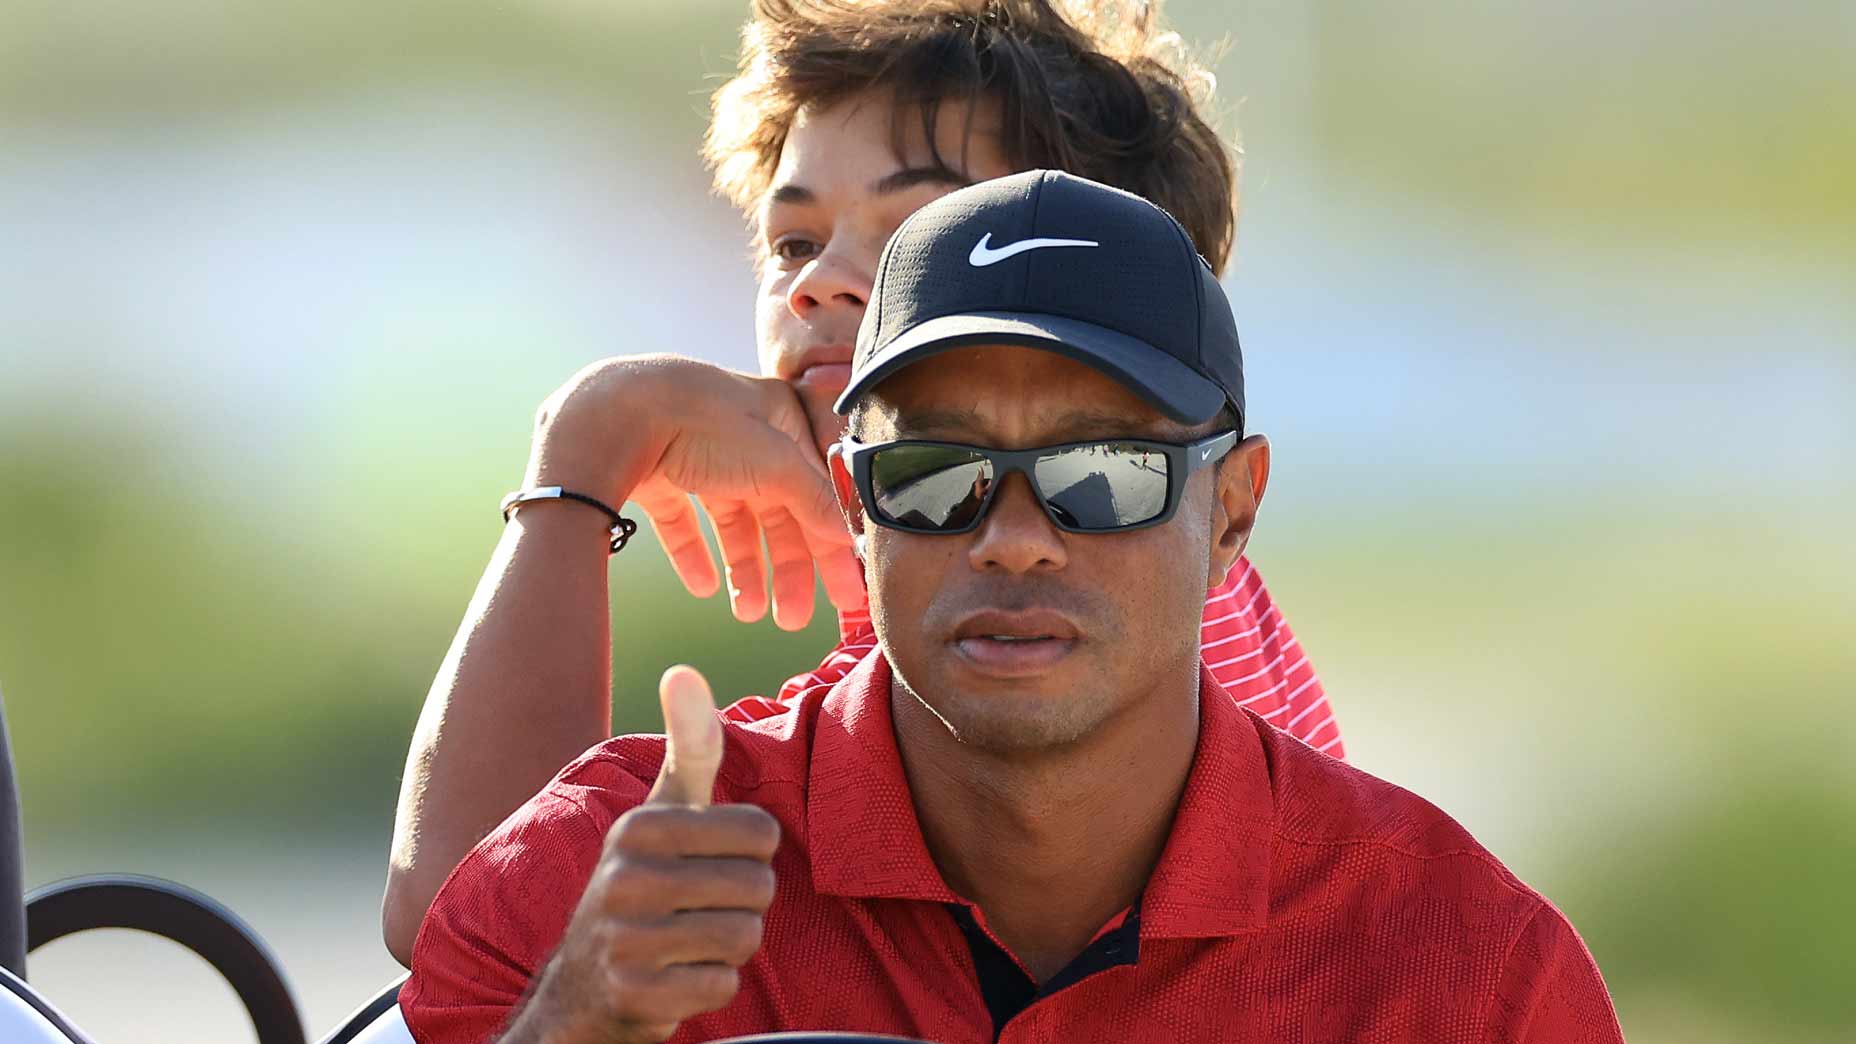 Tiger Woods watches Hero World Challenge in golf cart with son Charlie Woods